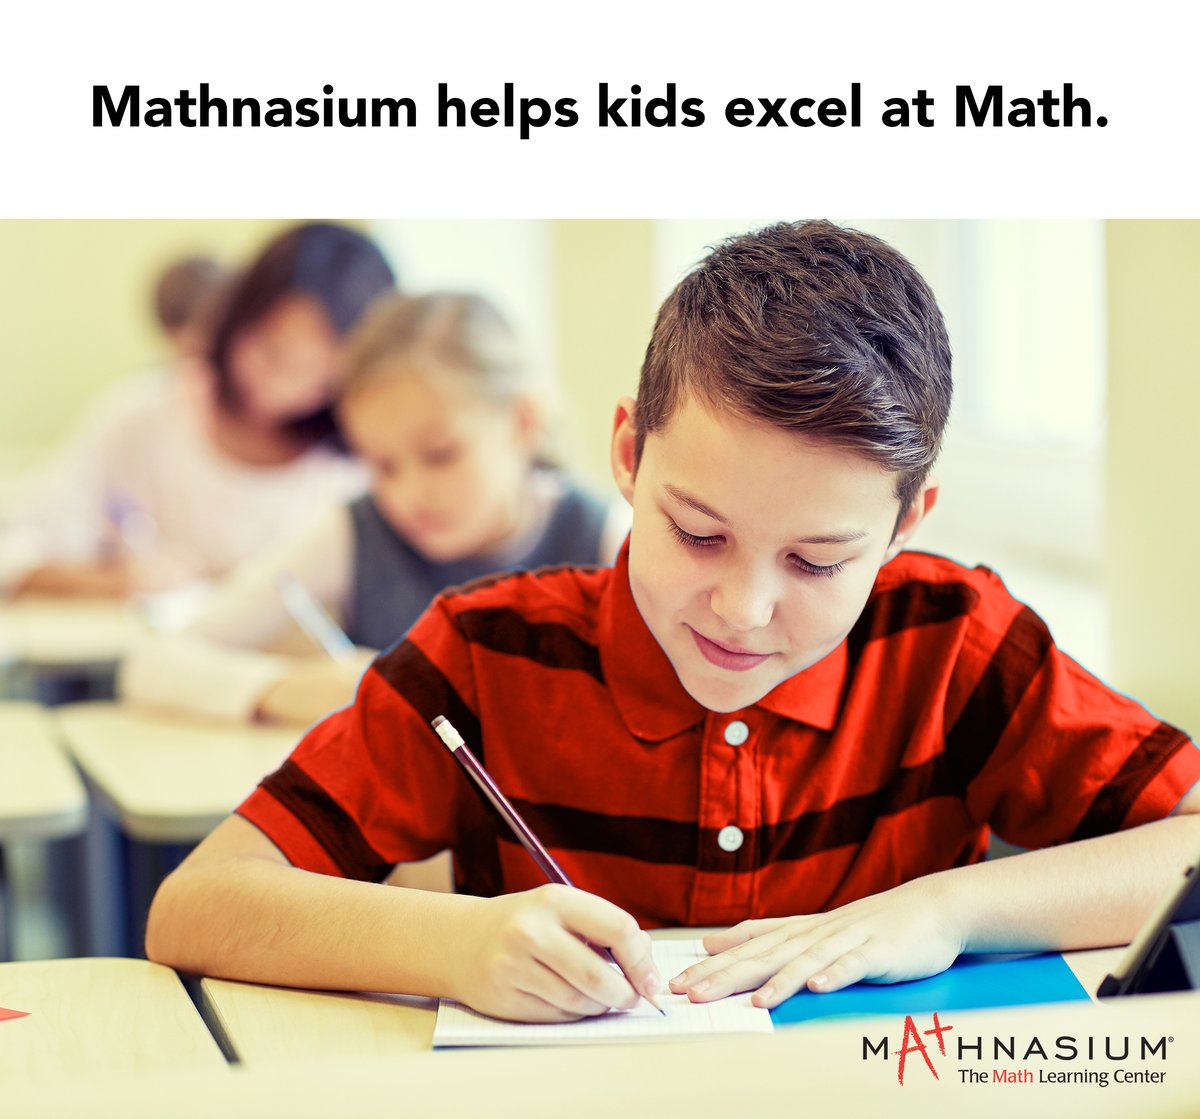 Mathnasium of Lorton helps kids learn to love math. ❤ 🙋 😁 Could your student use a helping hand? ✍ 😉 mathnasium.com/math-centers/l… #mathnasium #mathtutor #mathtest #mathgrade #mathhelp #mathclass